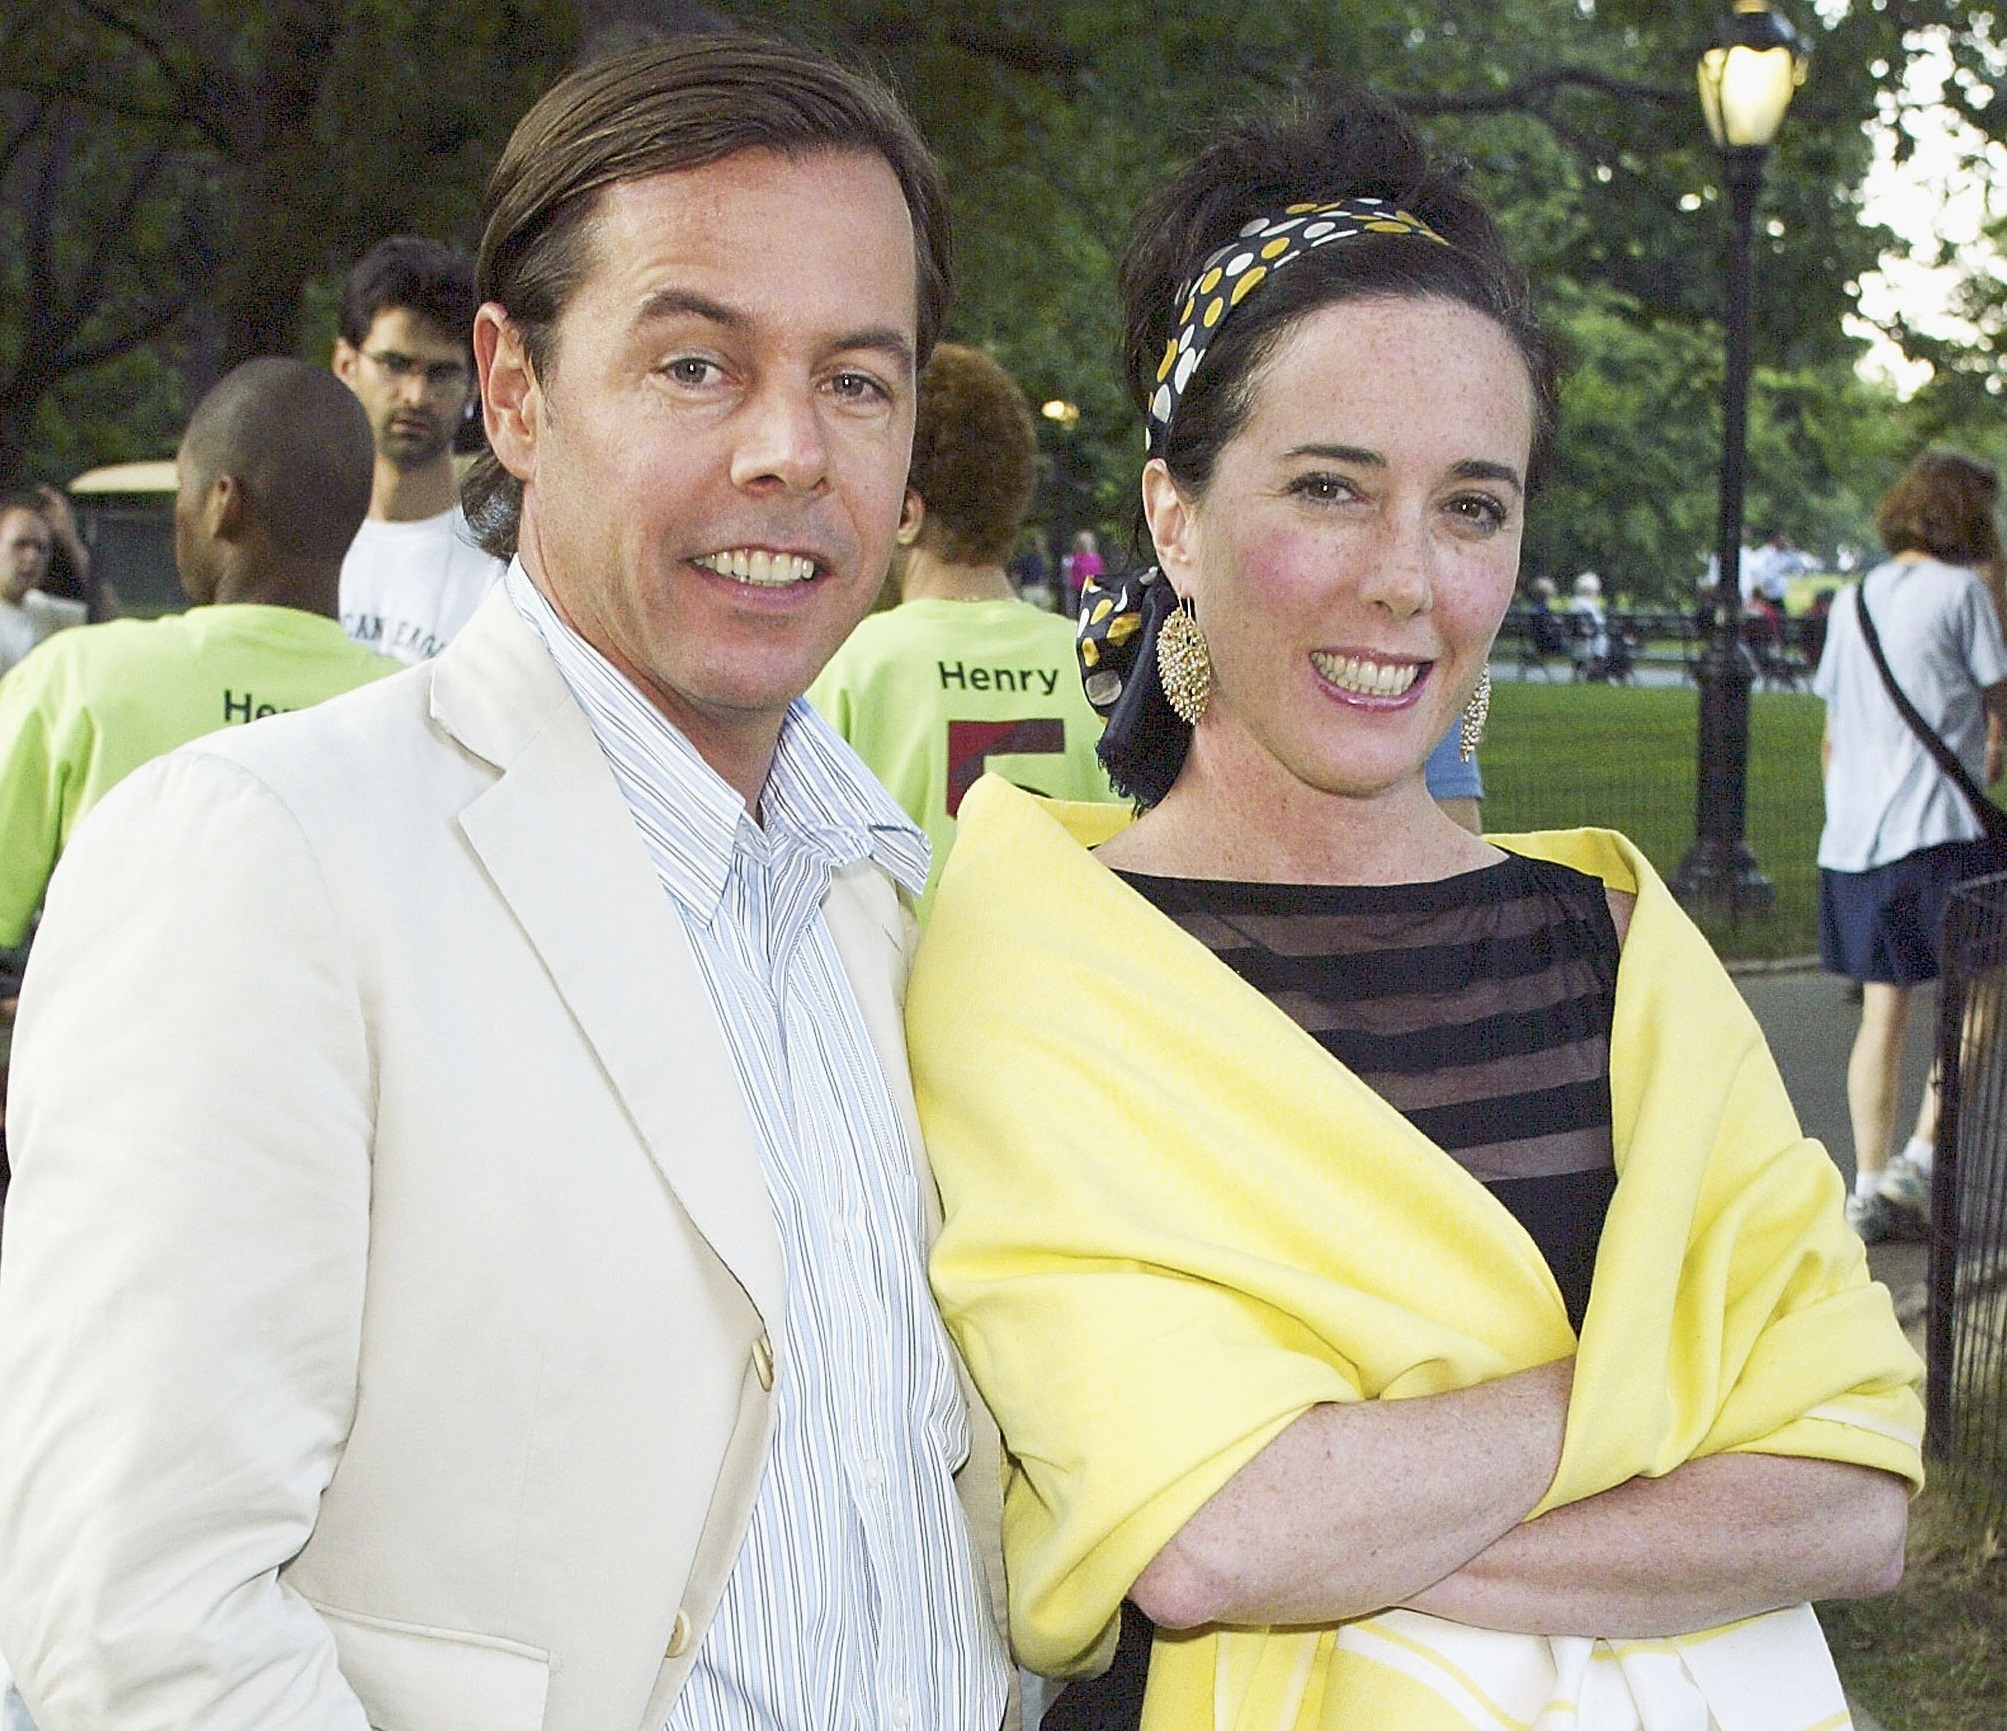 Andy Spade, Kate Spade's Husband: 5 Fast Facts You Need to Know 